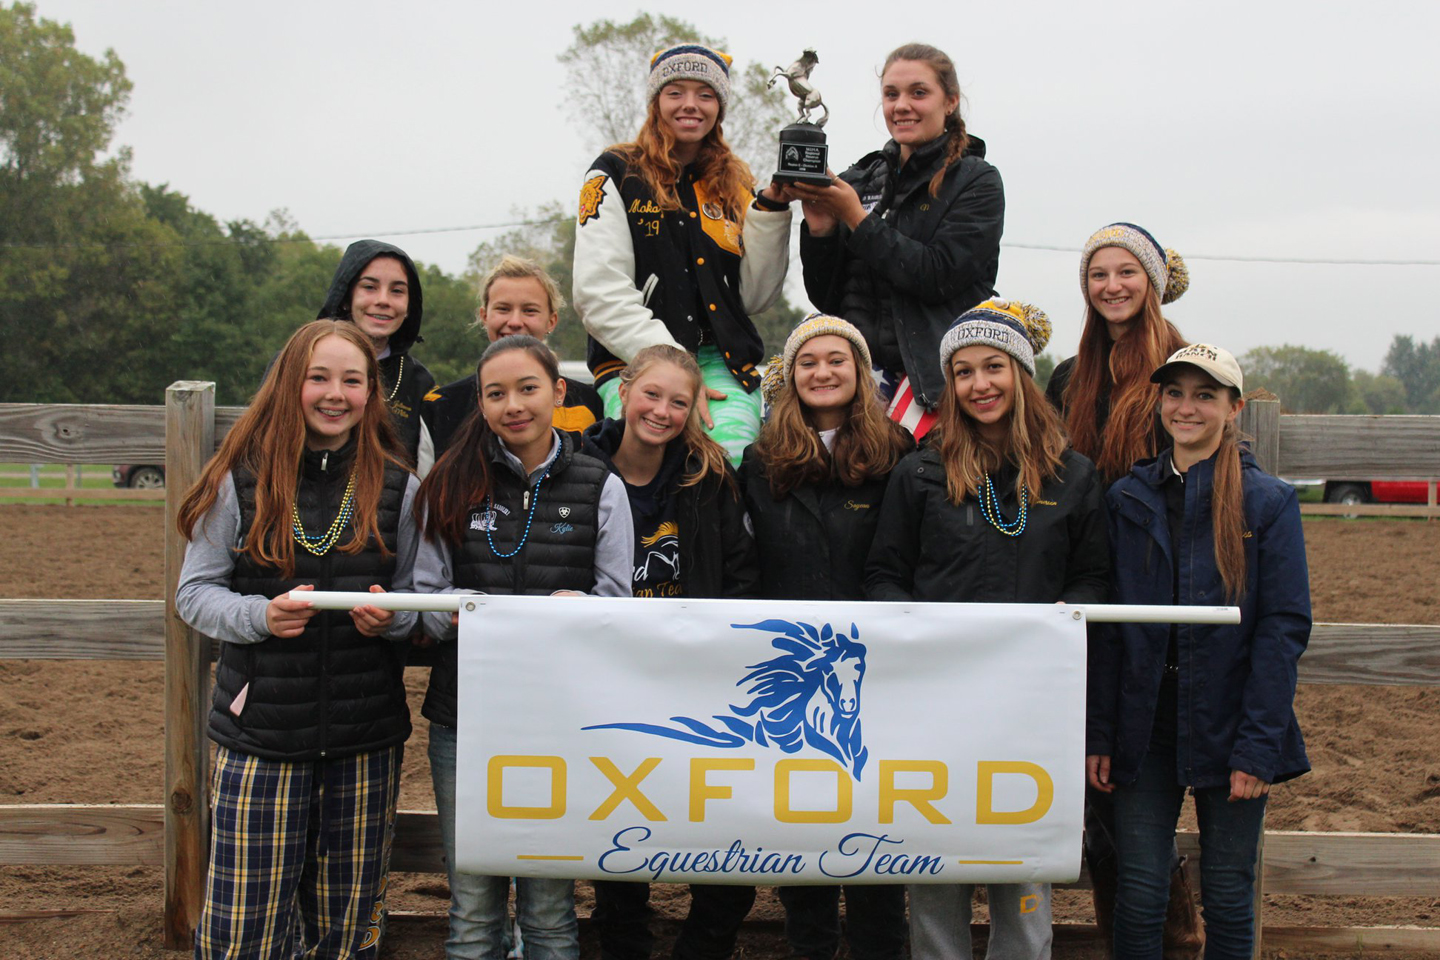 Oxford’s equestrian team poses with its trophy. Photo provided.